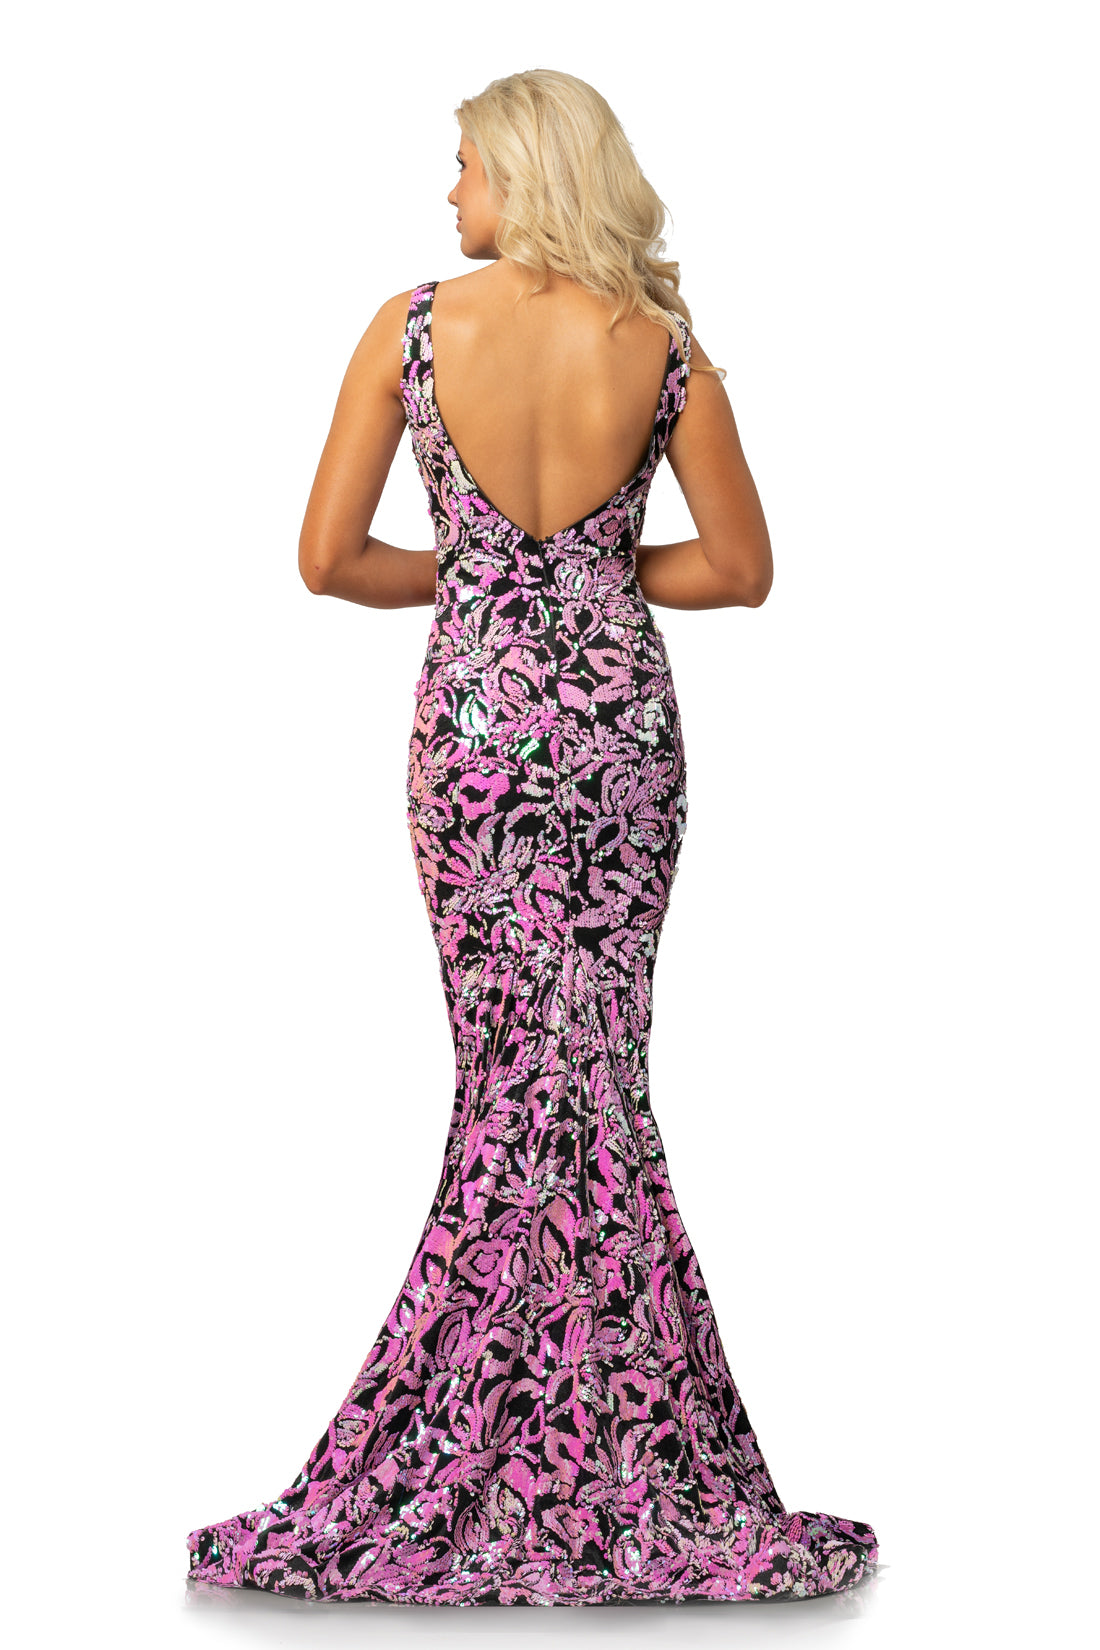 Johnathan Kayne 2106 is a velvet and sequins Prom Dress, Pageant Gown & Formal Evening Wear!  This Long Fitted Mermaid Dress Features a Stretch Velvet with Floral Iridescent  Sequin Embellishments along the entire dress. Deep V Neckline. with open V Back. Fit & Flare Silhouette with a Lush Trumpet Skirt. This Gown is Stunning!